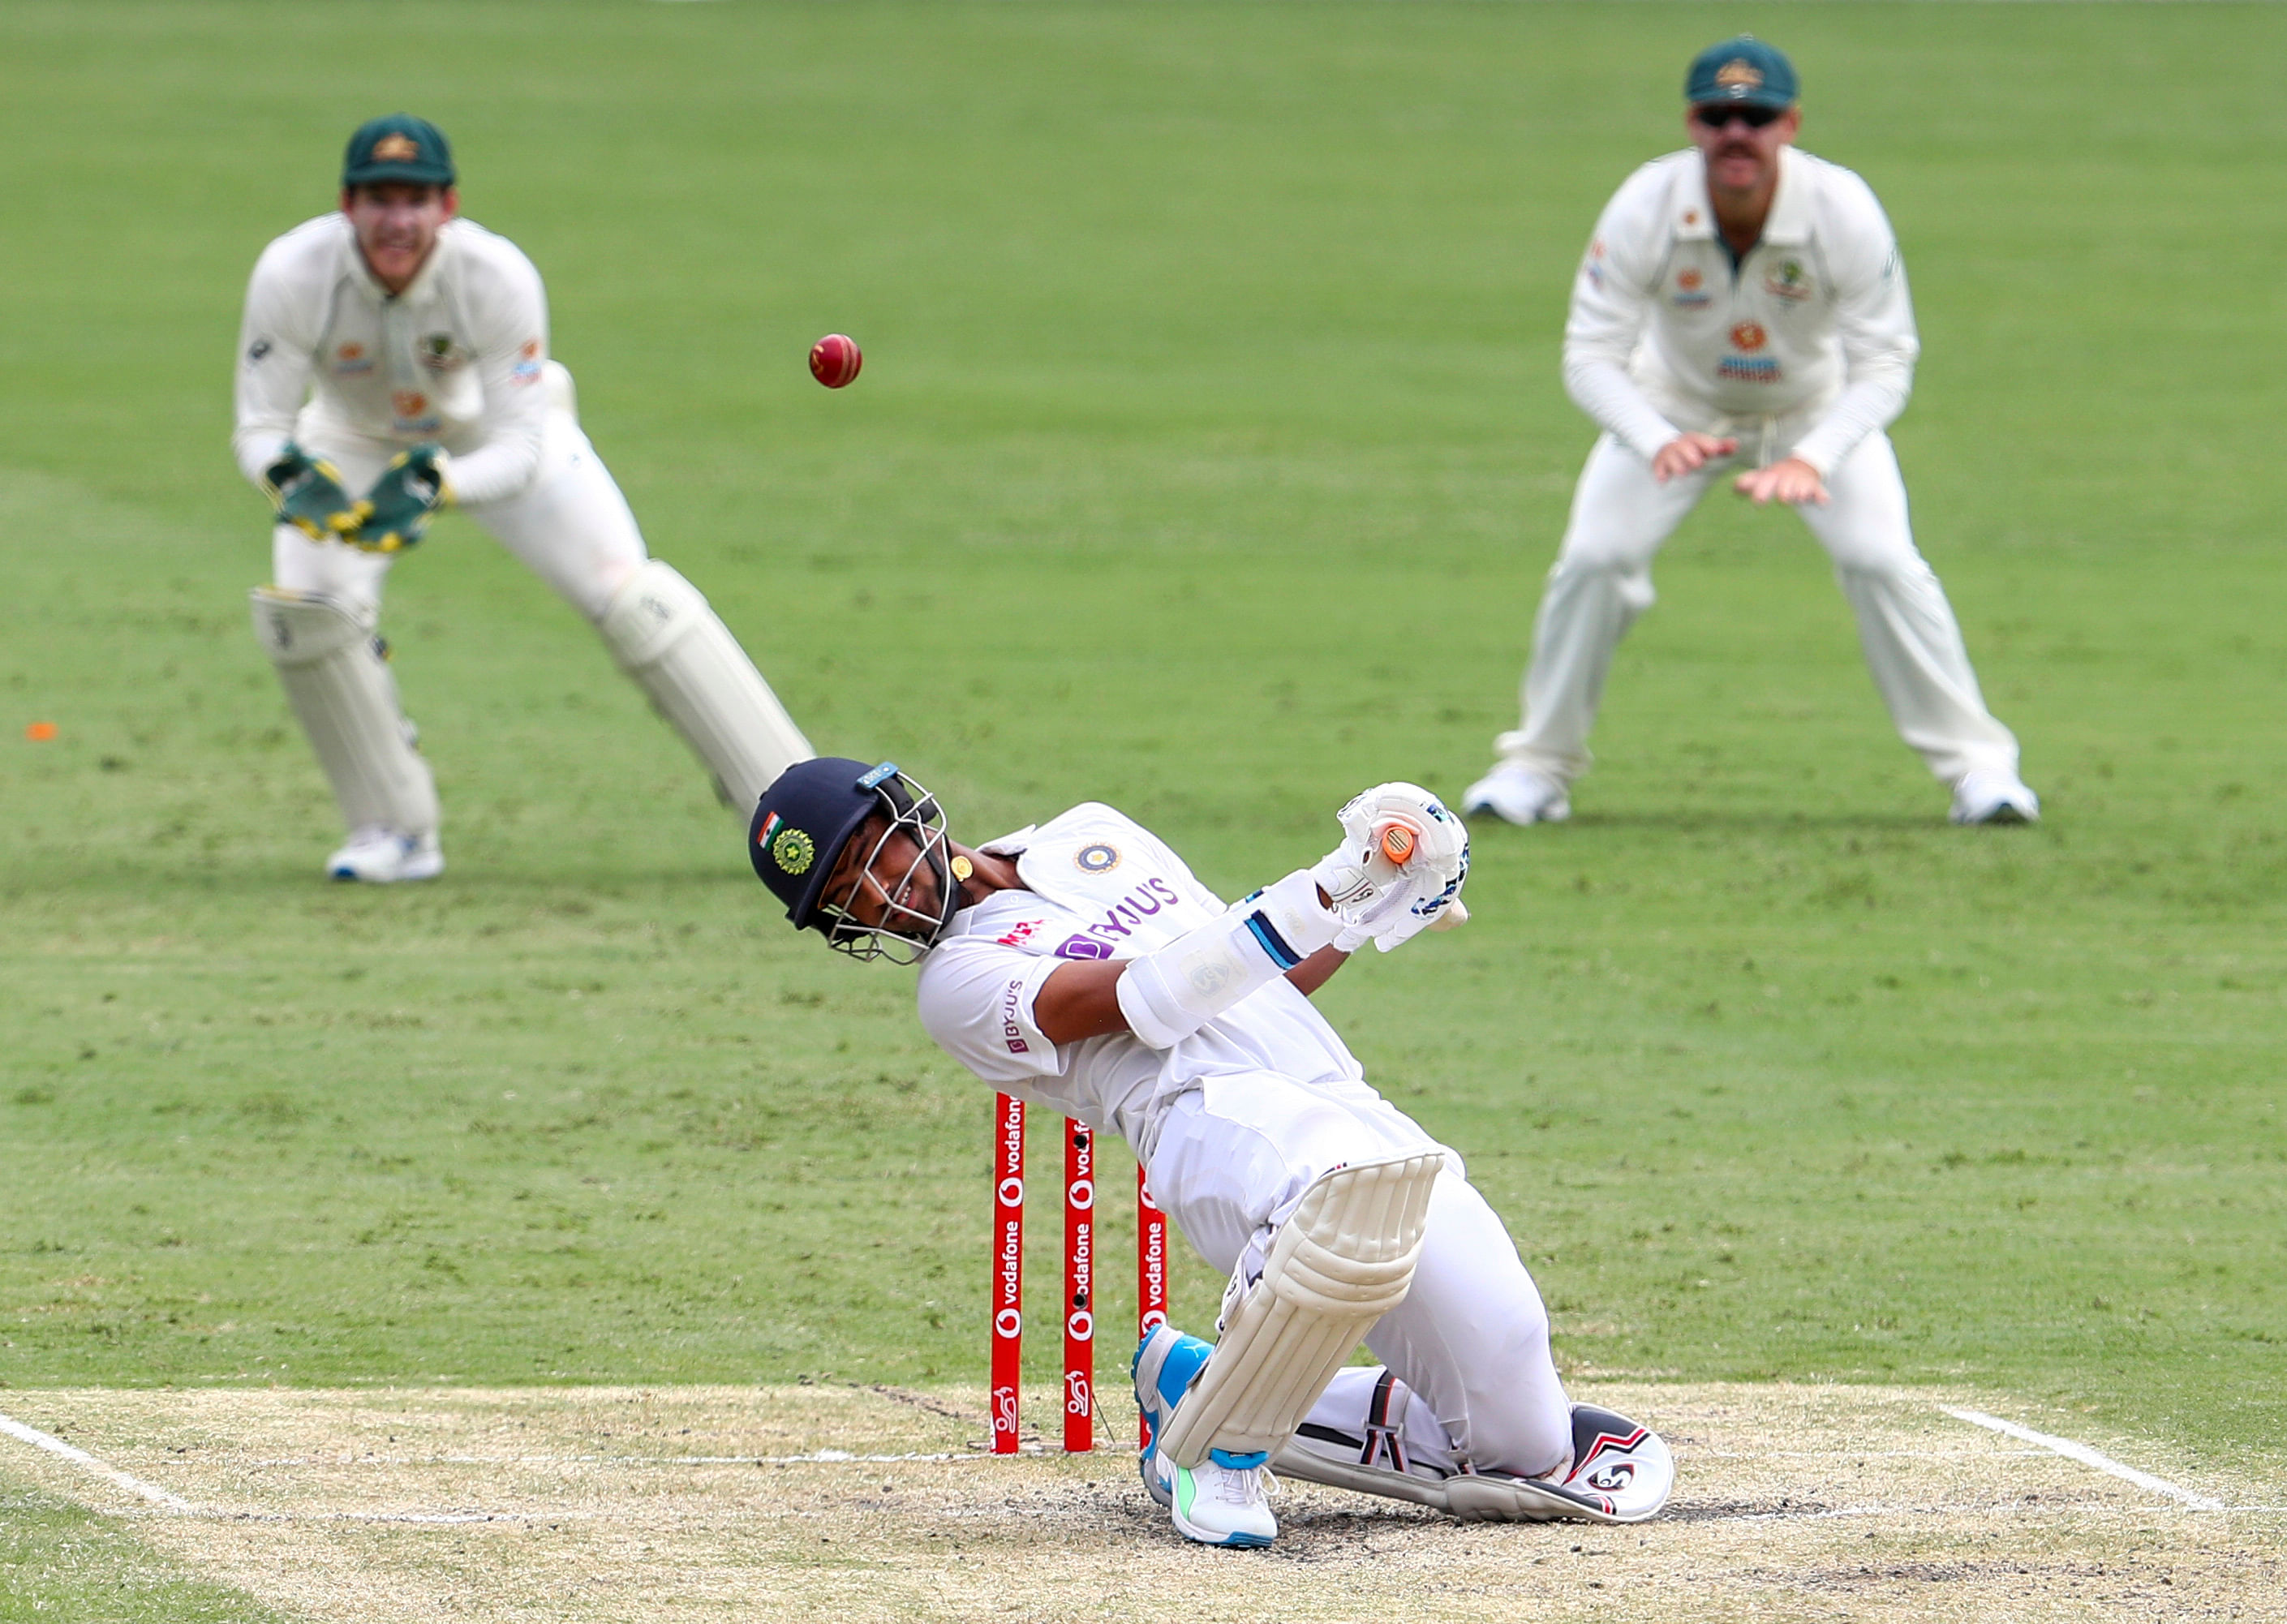 India's Washington Sundar ducks to avoid a bouncer during play on day three of the fourth cricket test between India and Australia at the Gabba, Brisbane. Credit: AP